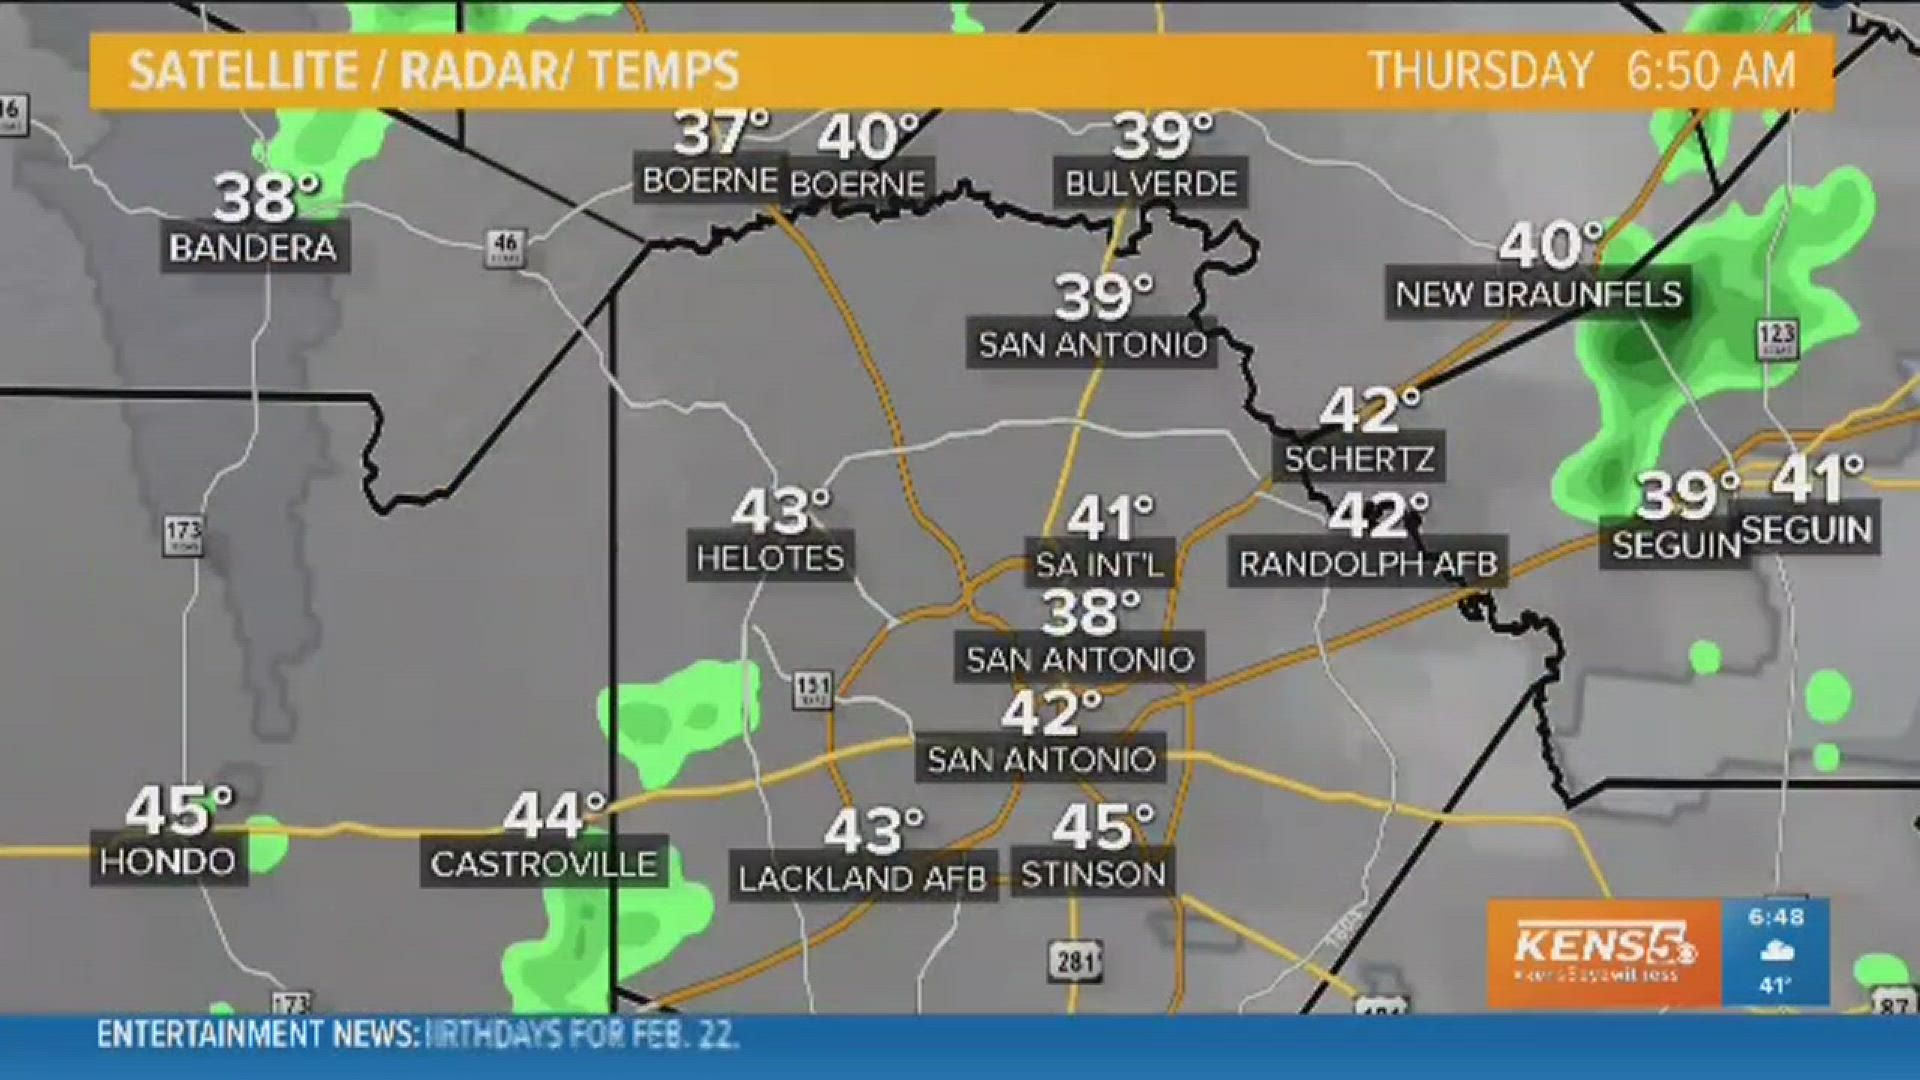 Meteorologist Paul Mireles has the full forecast, which includes cold, drizzly weather Thursday.